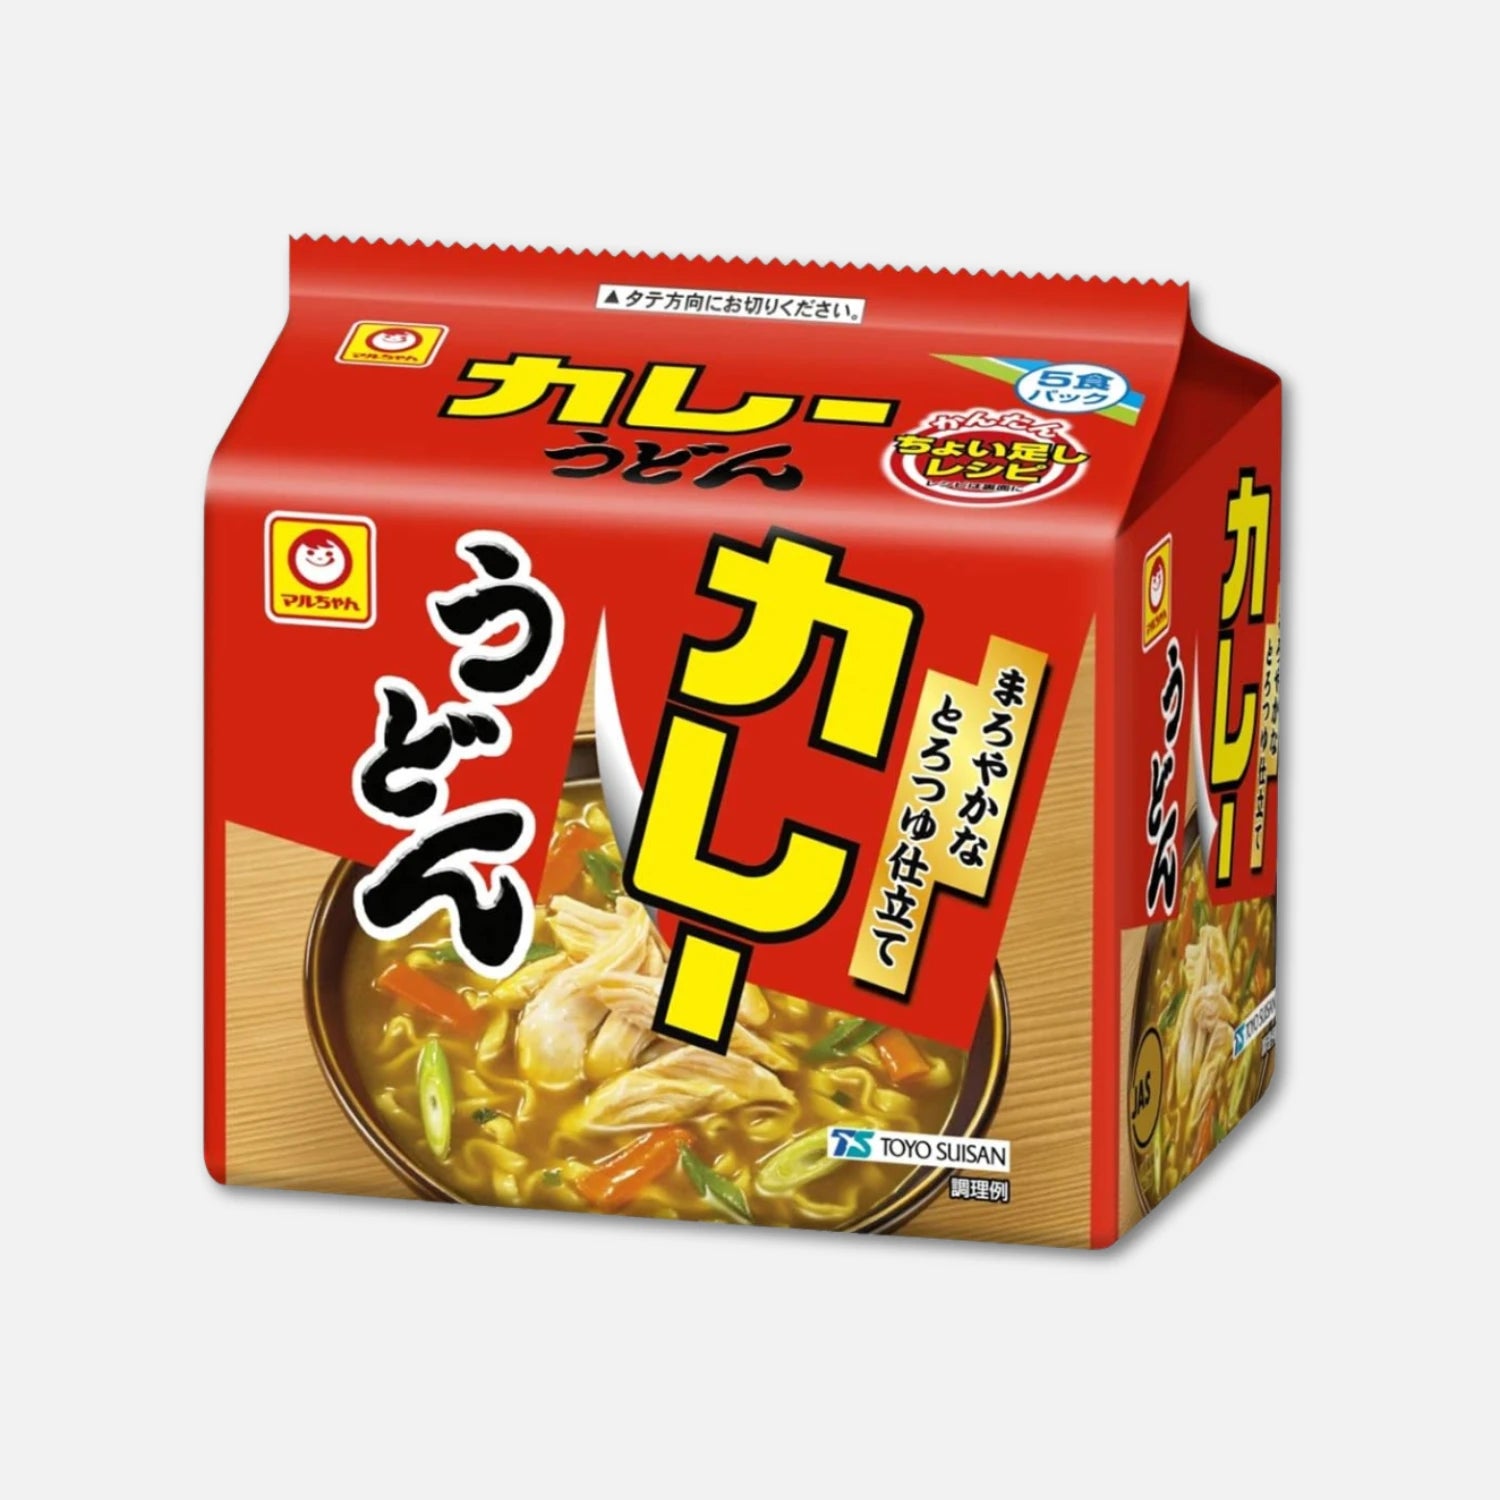 Maruchan Curry Udon Instant Noodle 101g (5 Units)